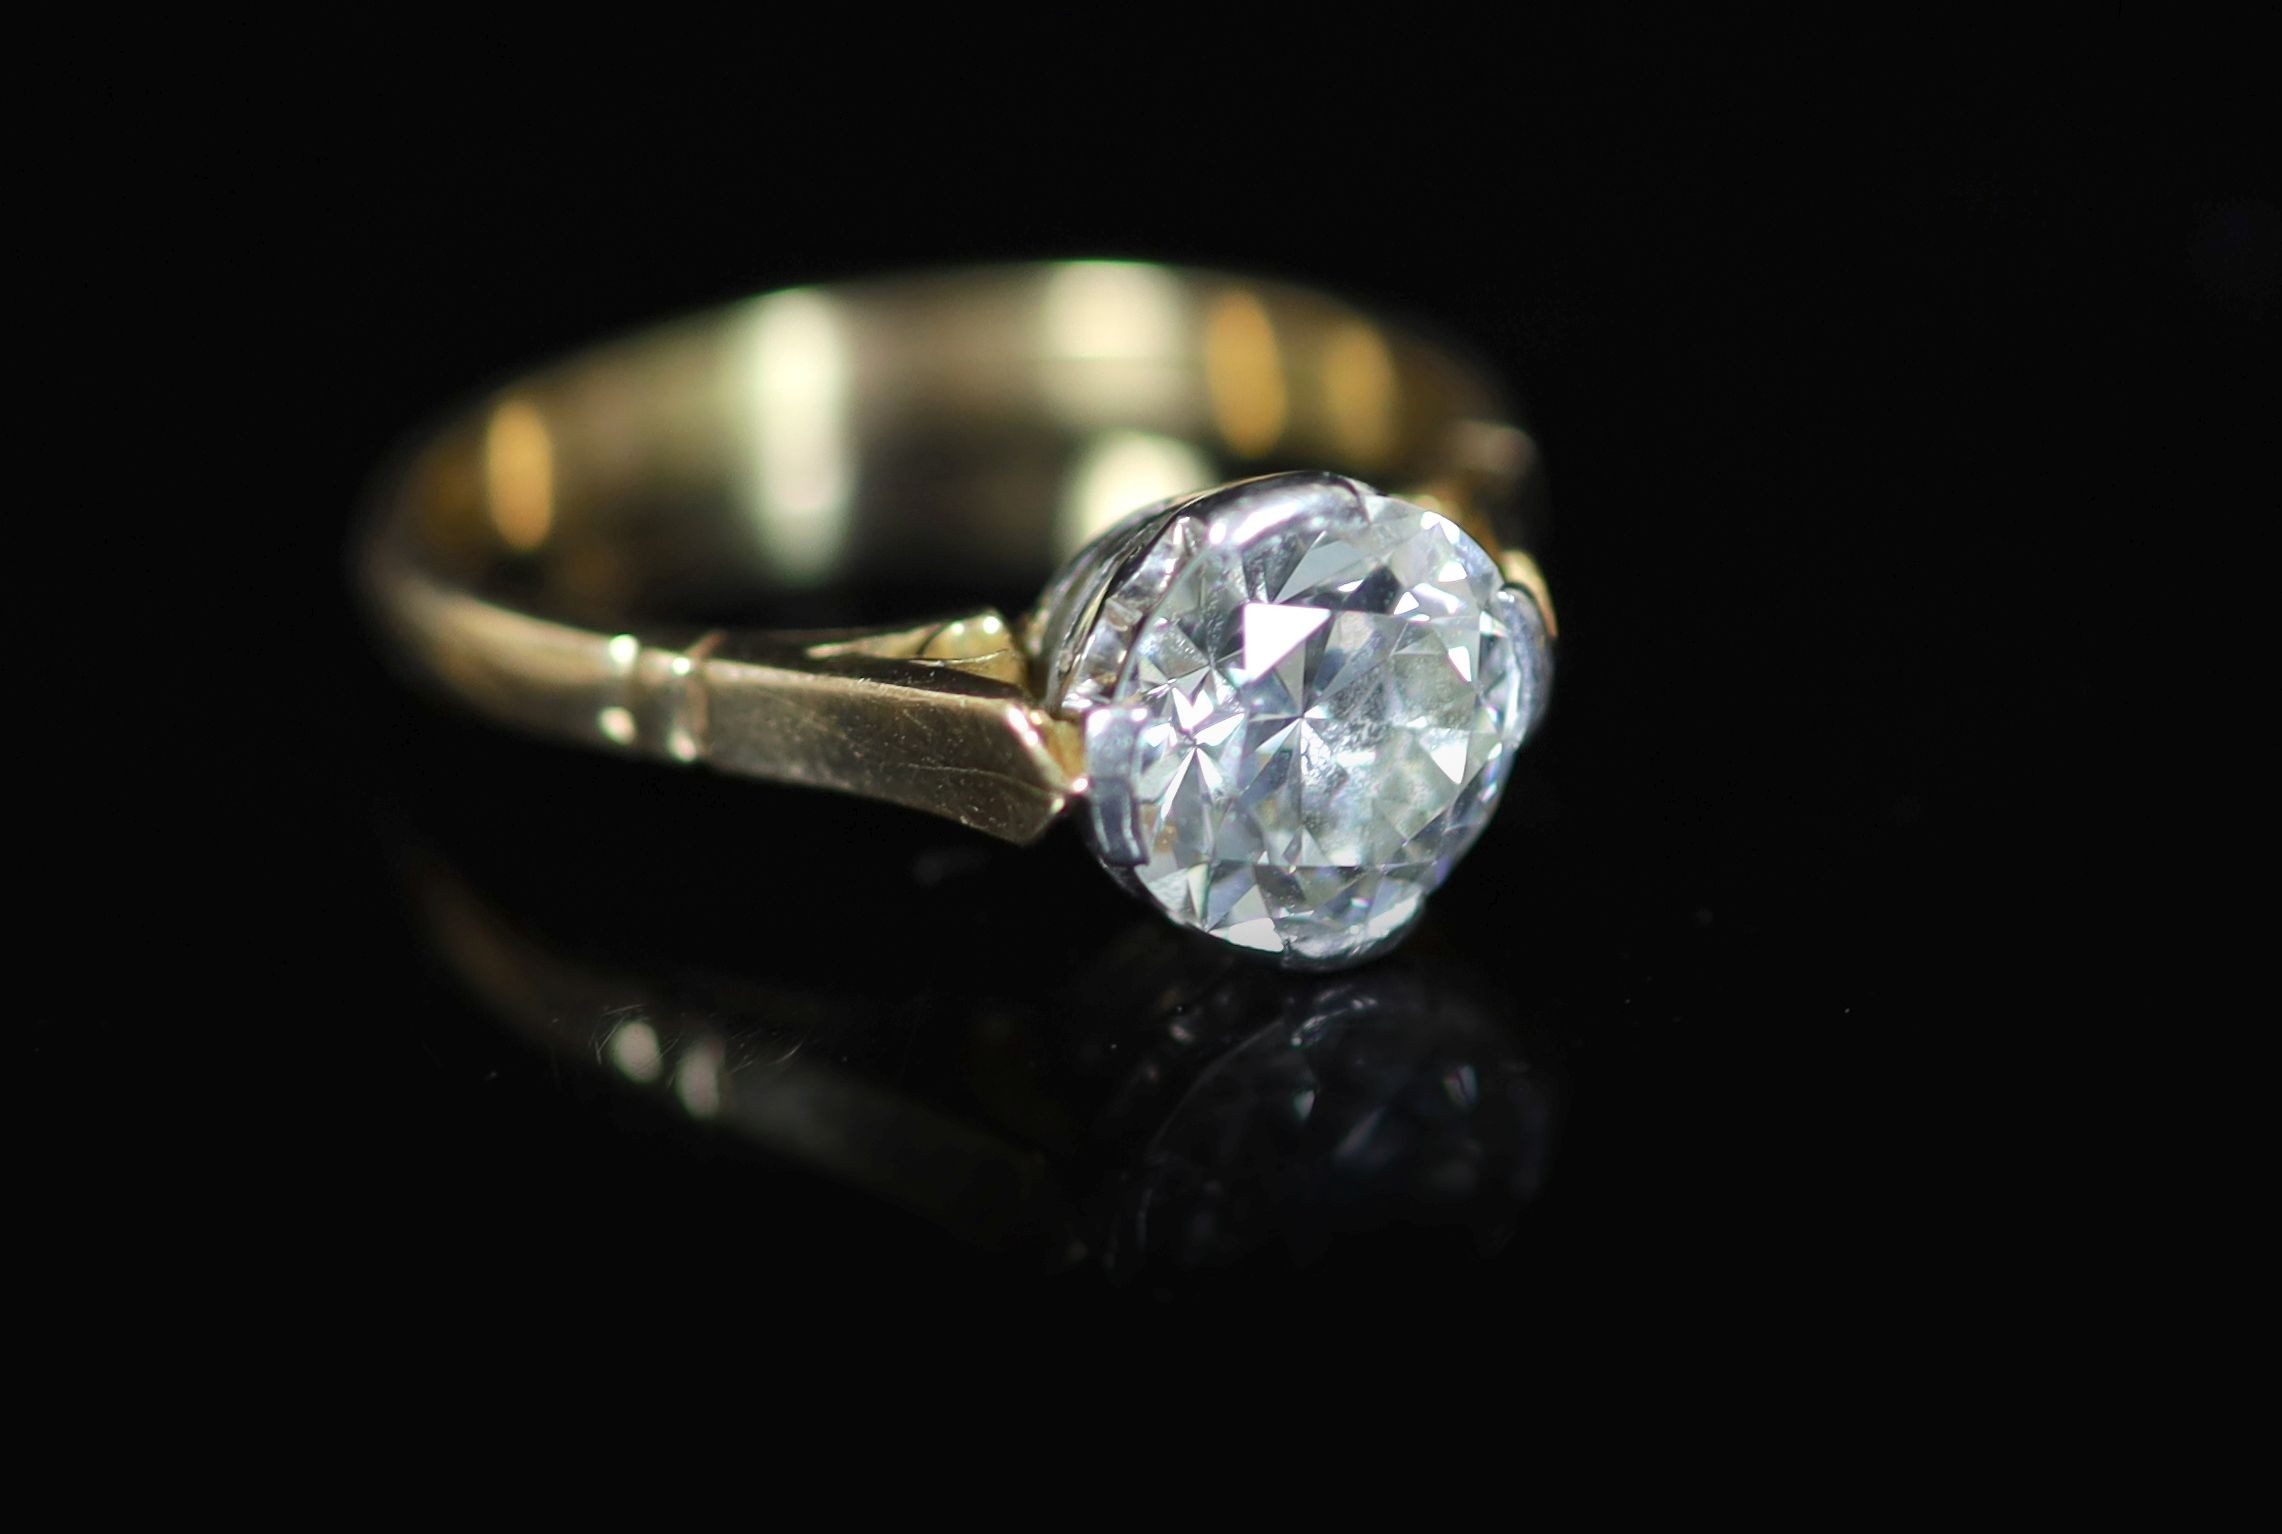 A gold and solitaire diamond ring                                                                                                                                                                                           